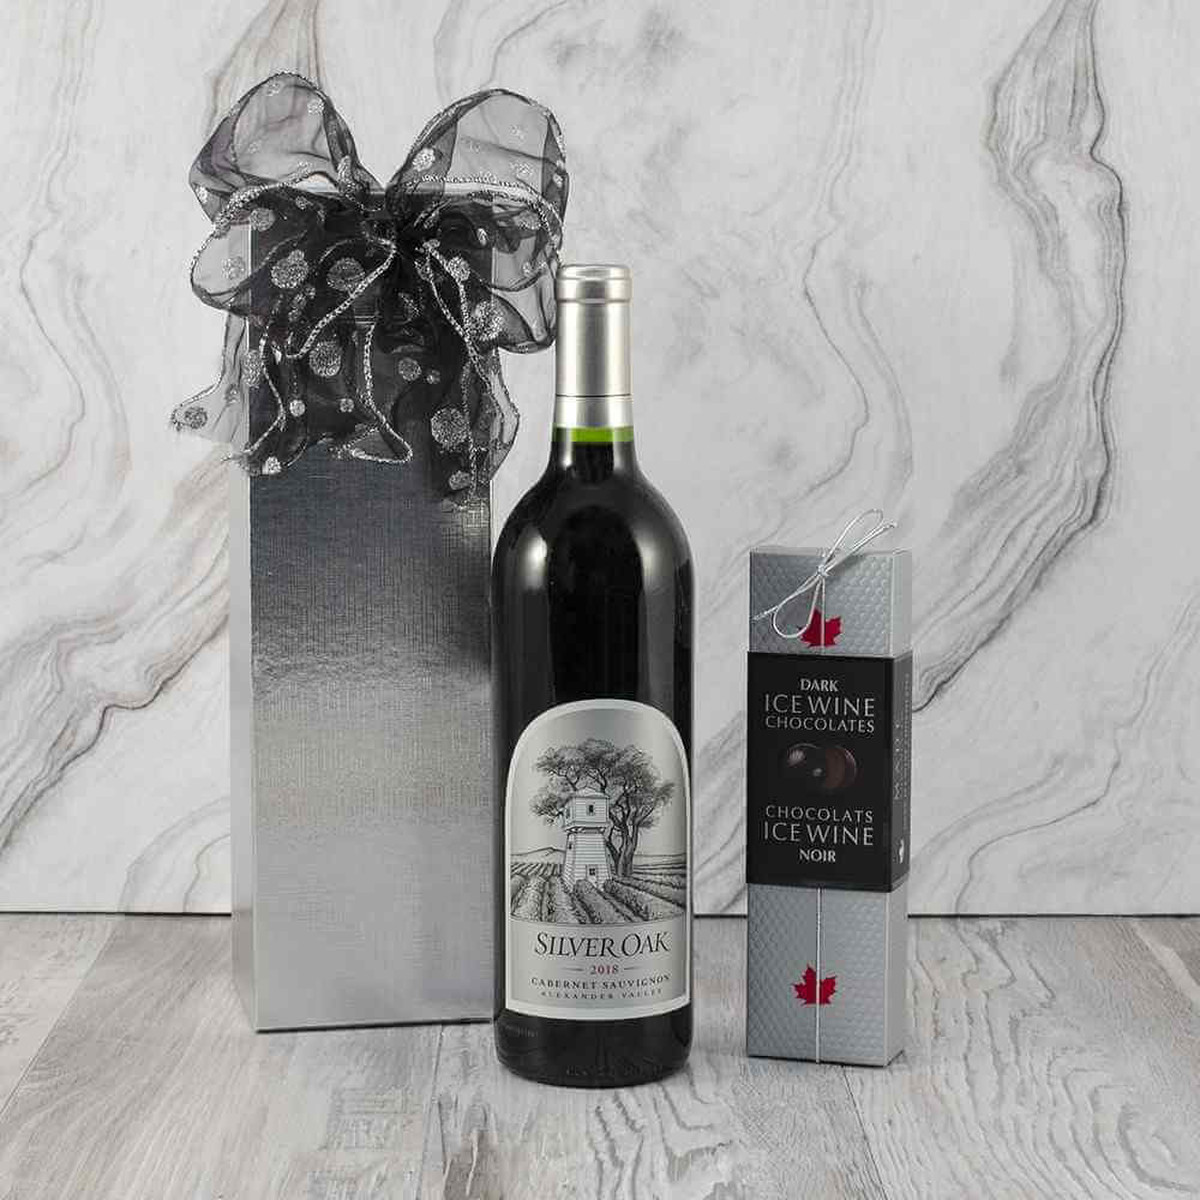 Silver Oak Alexander Valley Cab Sauv and Wine Gift Box